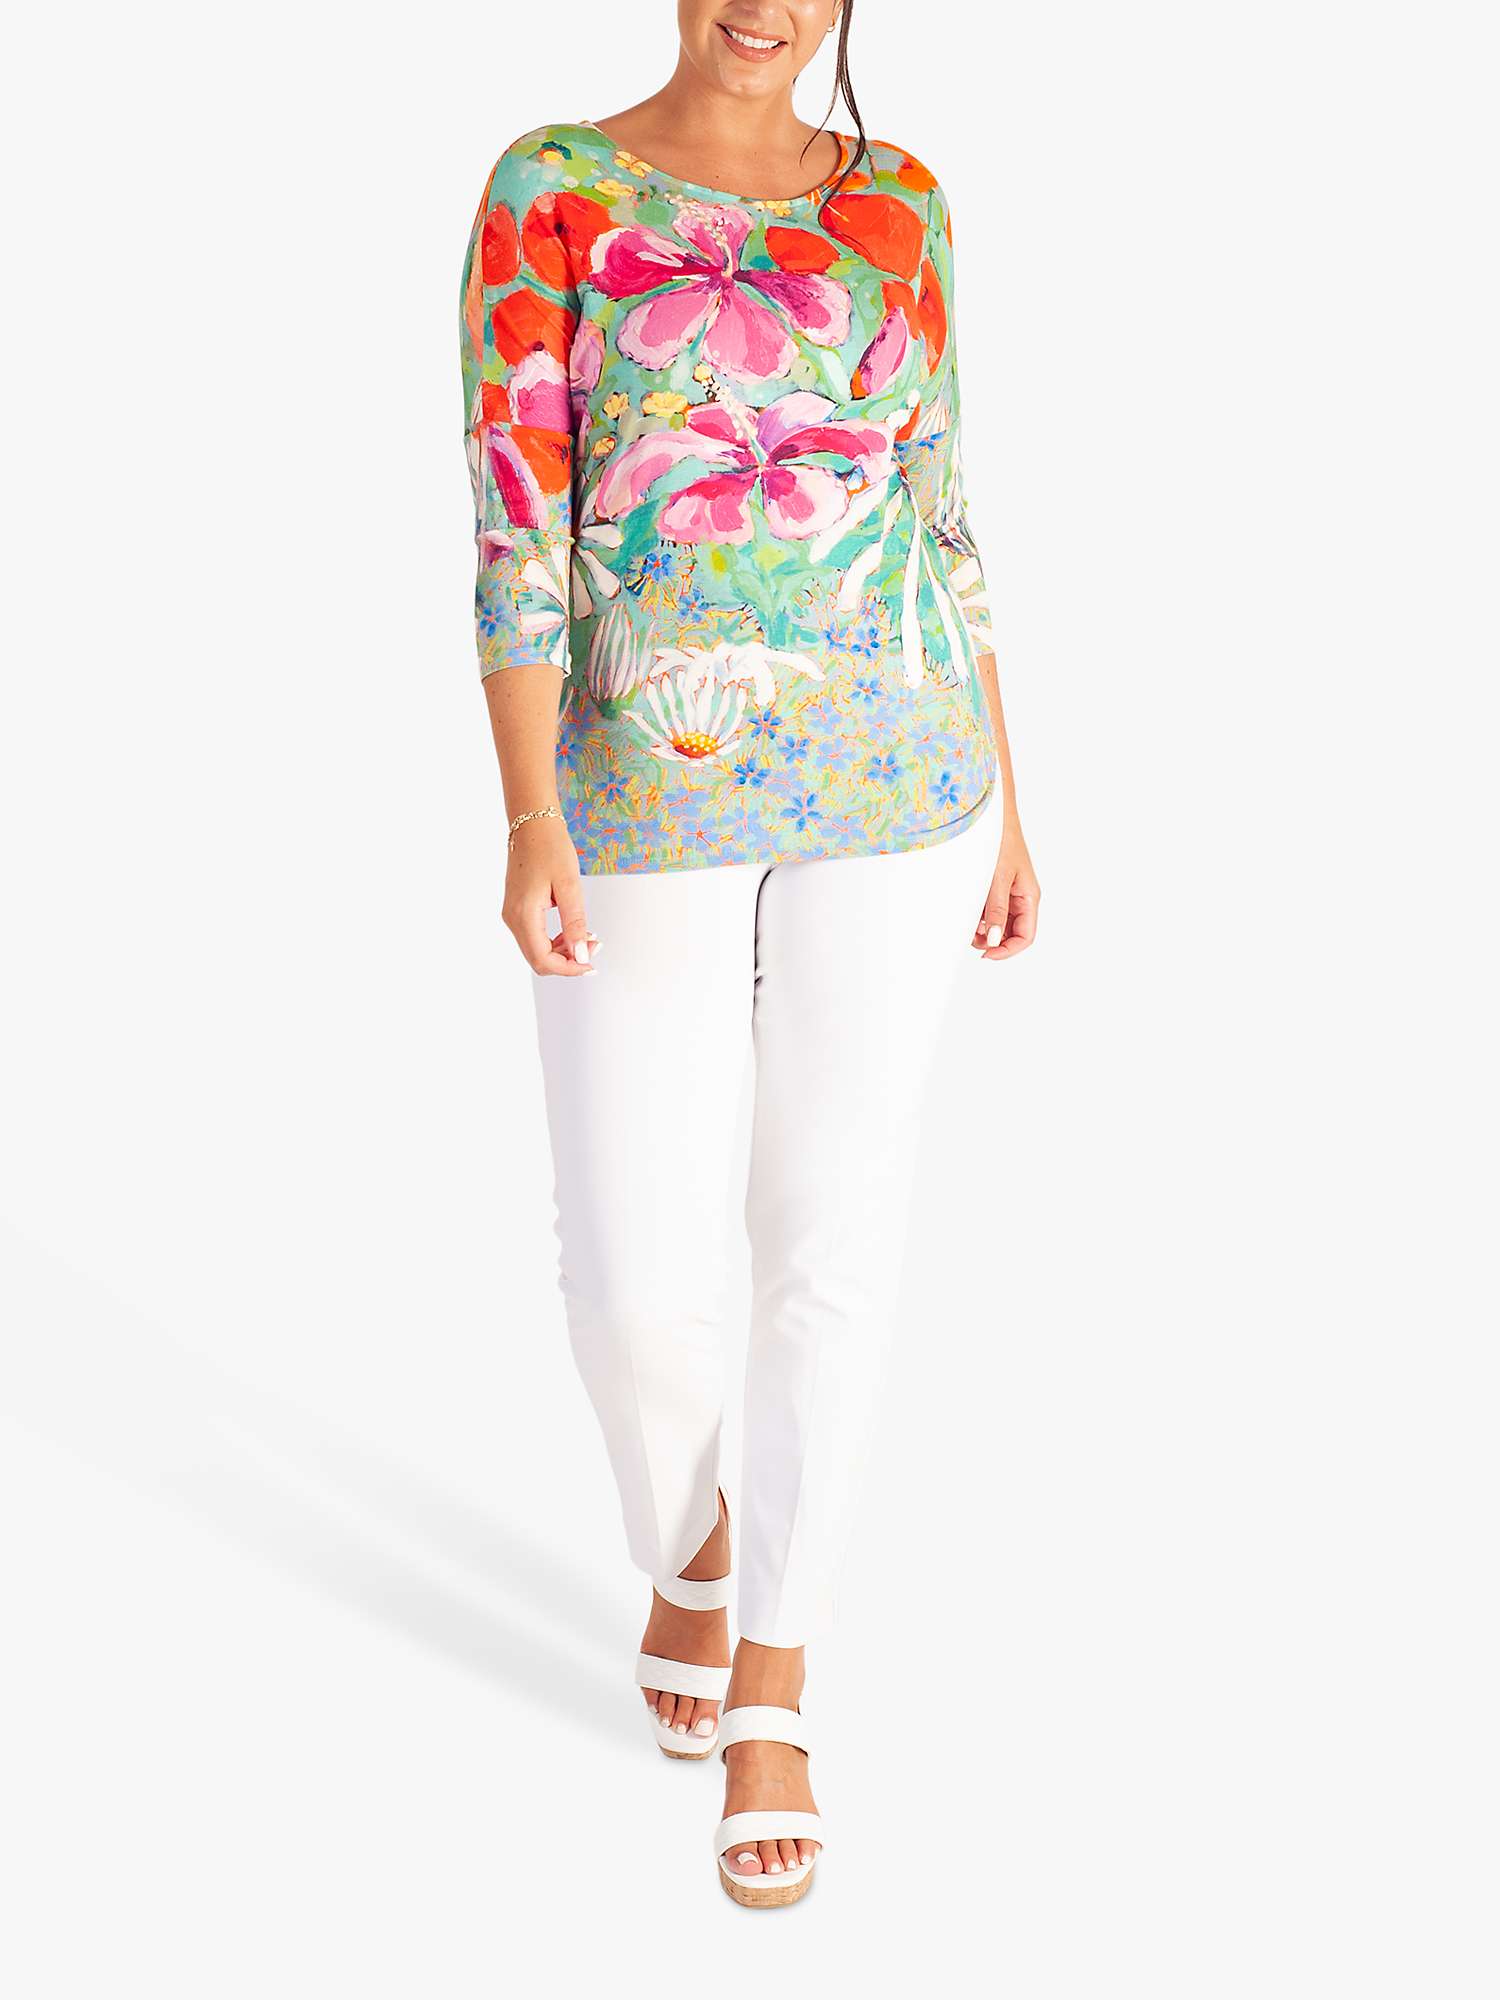 Buy chesca Tropical Print Floral Jersey Top, Green/Multi Online at johnlewis.com